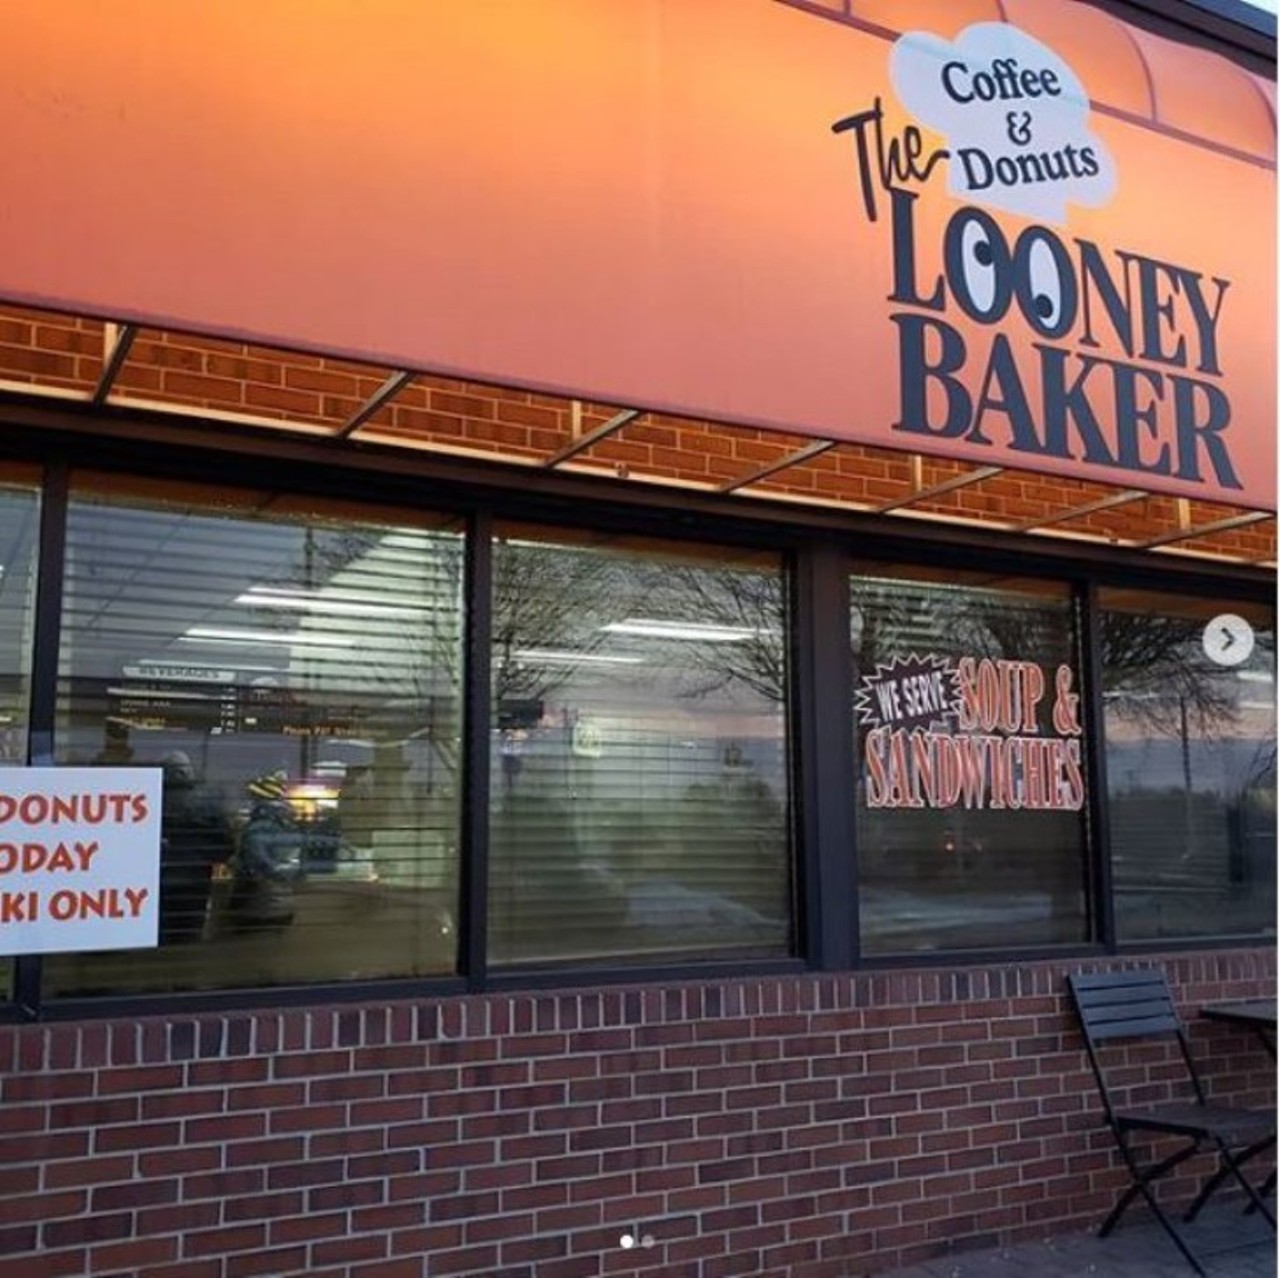 The Looney Baker
13931 Farmington Rd., Livonia; 734-425-8569
The Looney Baker is a classic Livonia bakery is open around-the-clock every day to ensure that you&#146;re always getting a bite of the freshest donuts in town. Customers rave about the glazed apple fritters, but don&#146;t forget to treat yourself to the Looney Baker&#146;s diverse selection of muffins and bagels!
Photo courtesy of Instagram user josephslowvak